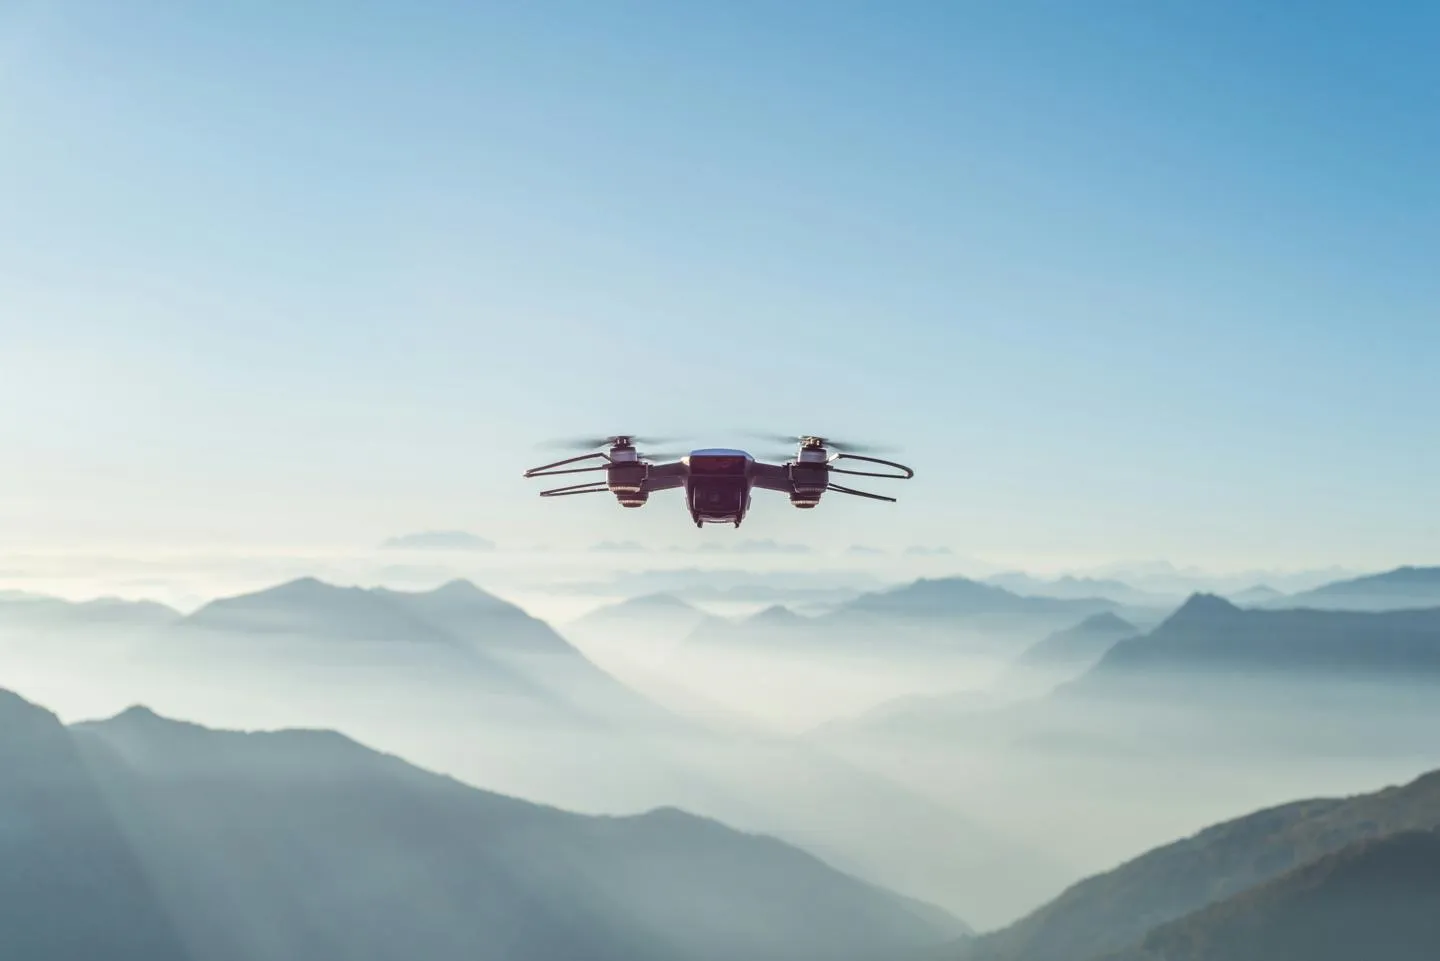 A drone hovers above mist-shrouded mountains